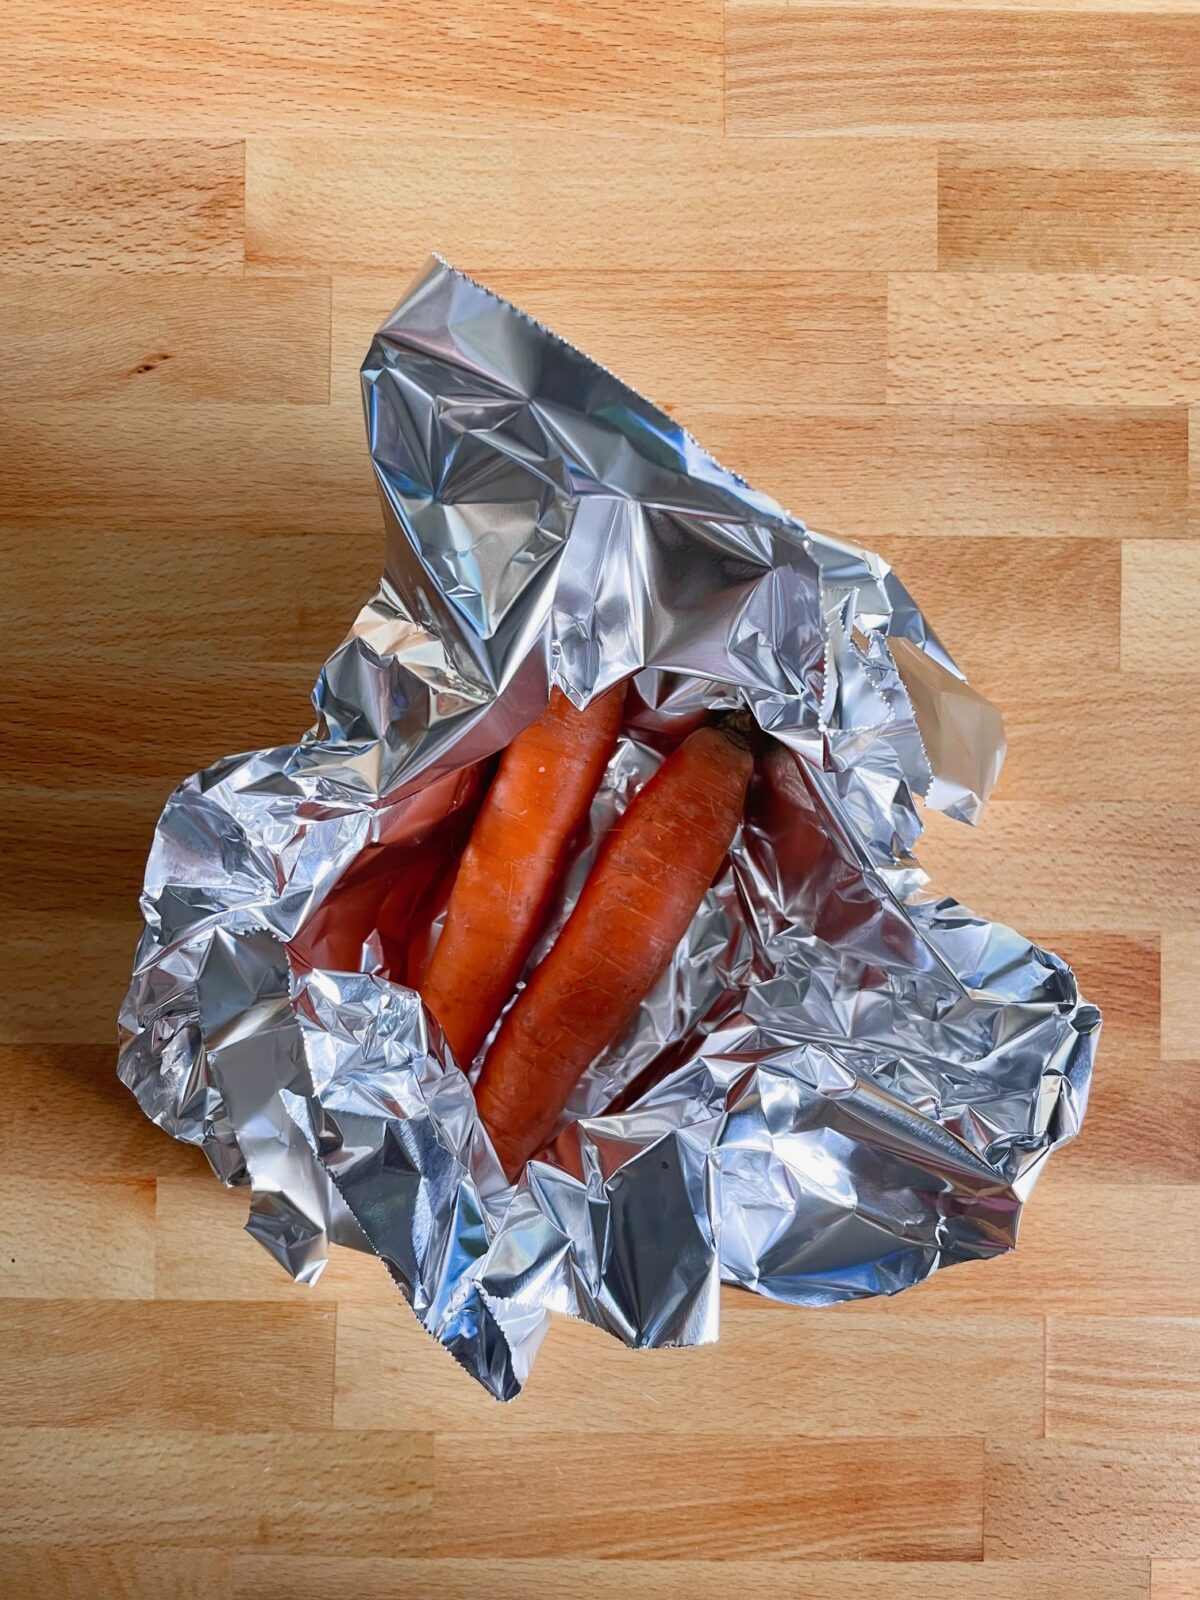 Two orange carrots partly wrapped in aluminum foil, and on a wooden board.